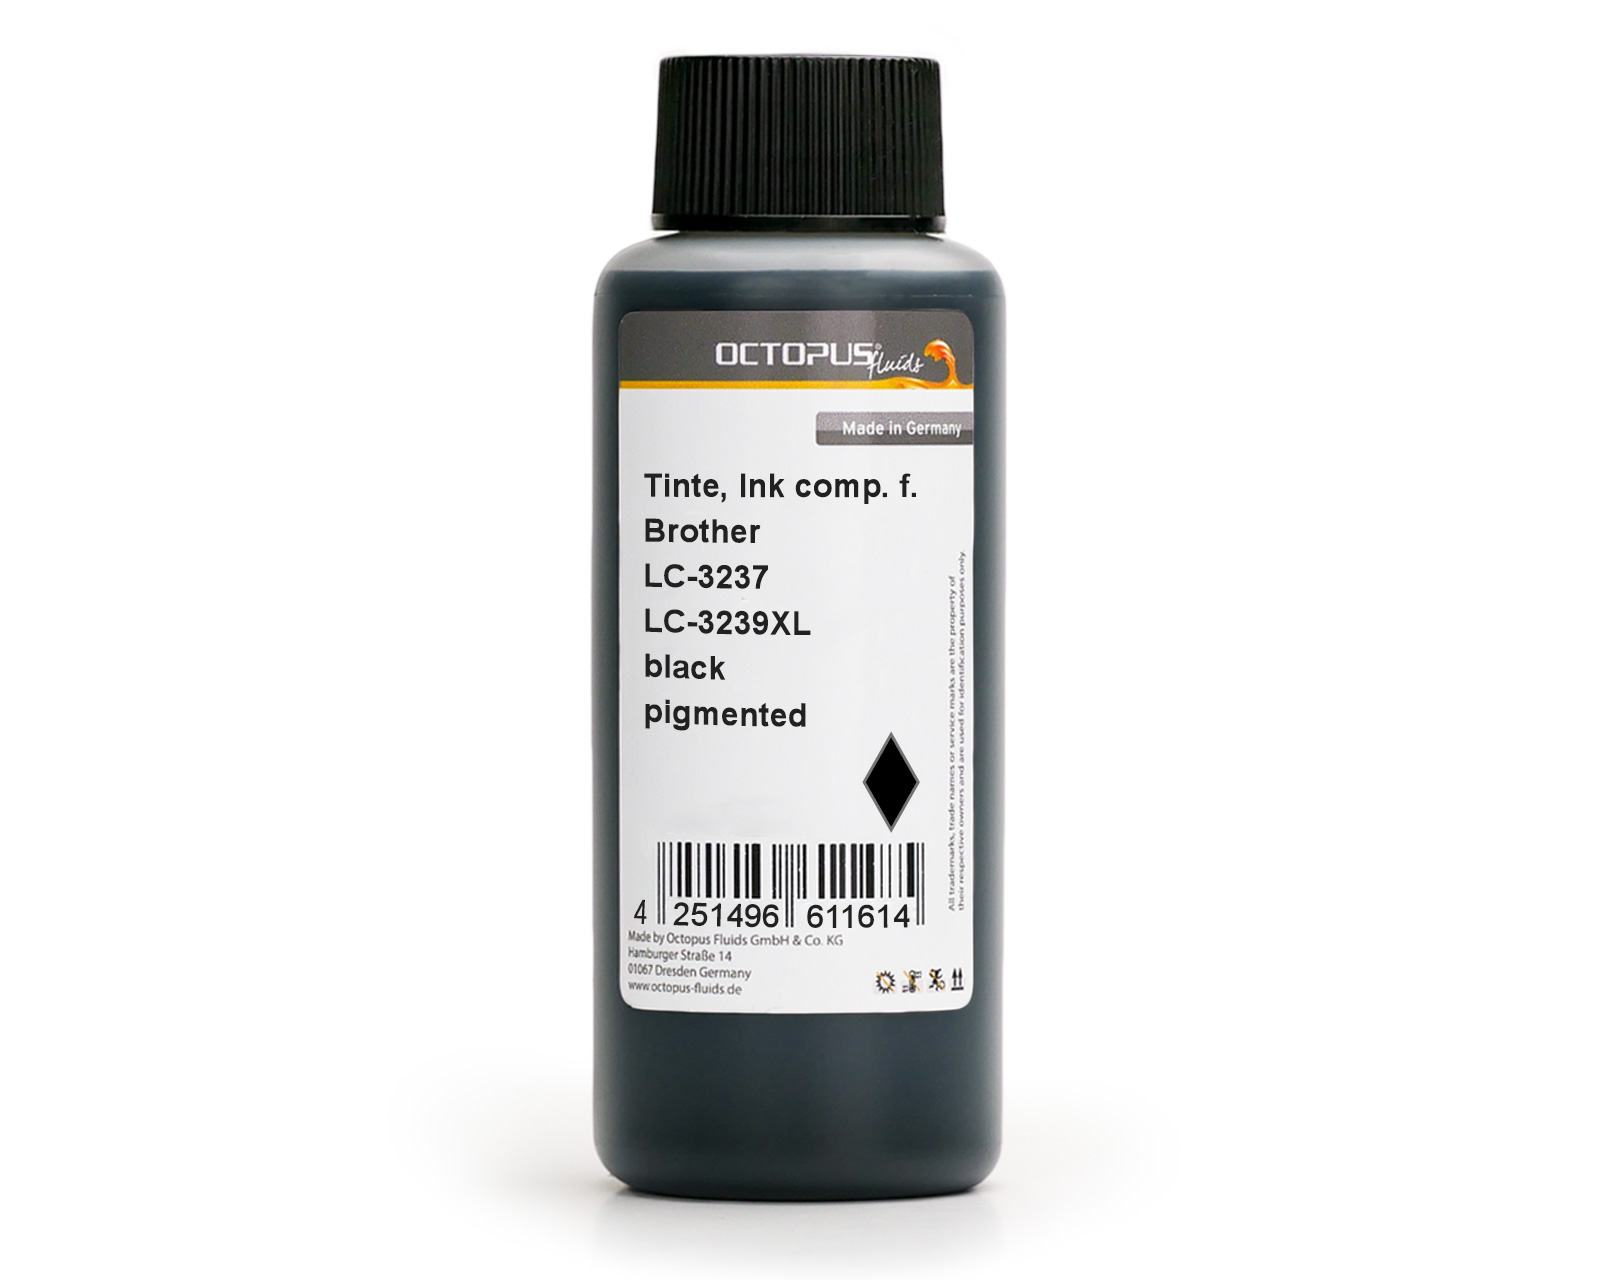 Refill ink comp. with Brother LC-3237 BK, LC-3239 BK, Brother HL-J 6000, 6100, MFC-J 5945, 6945, 6947 black